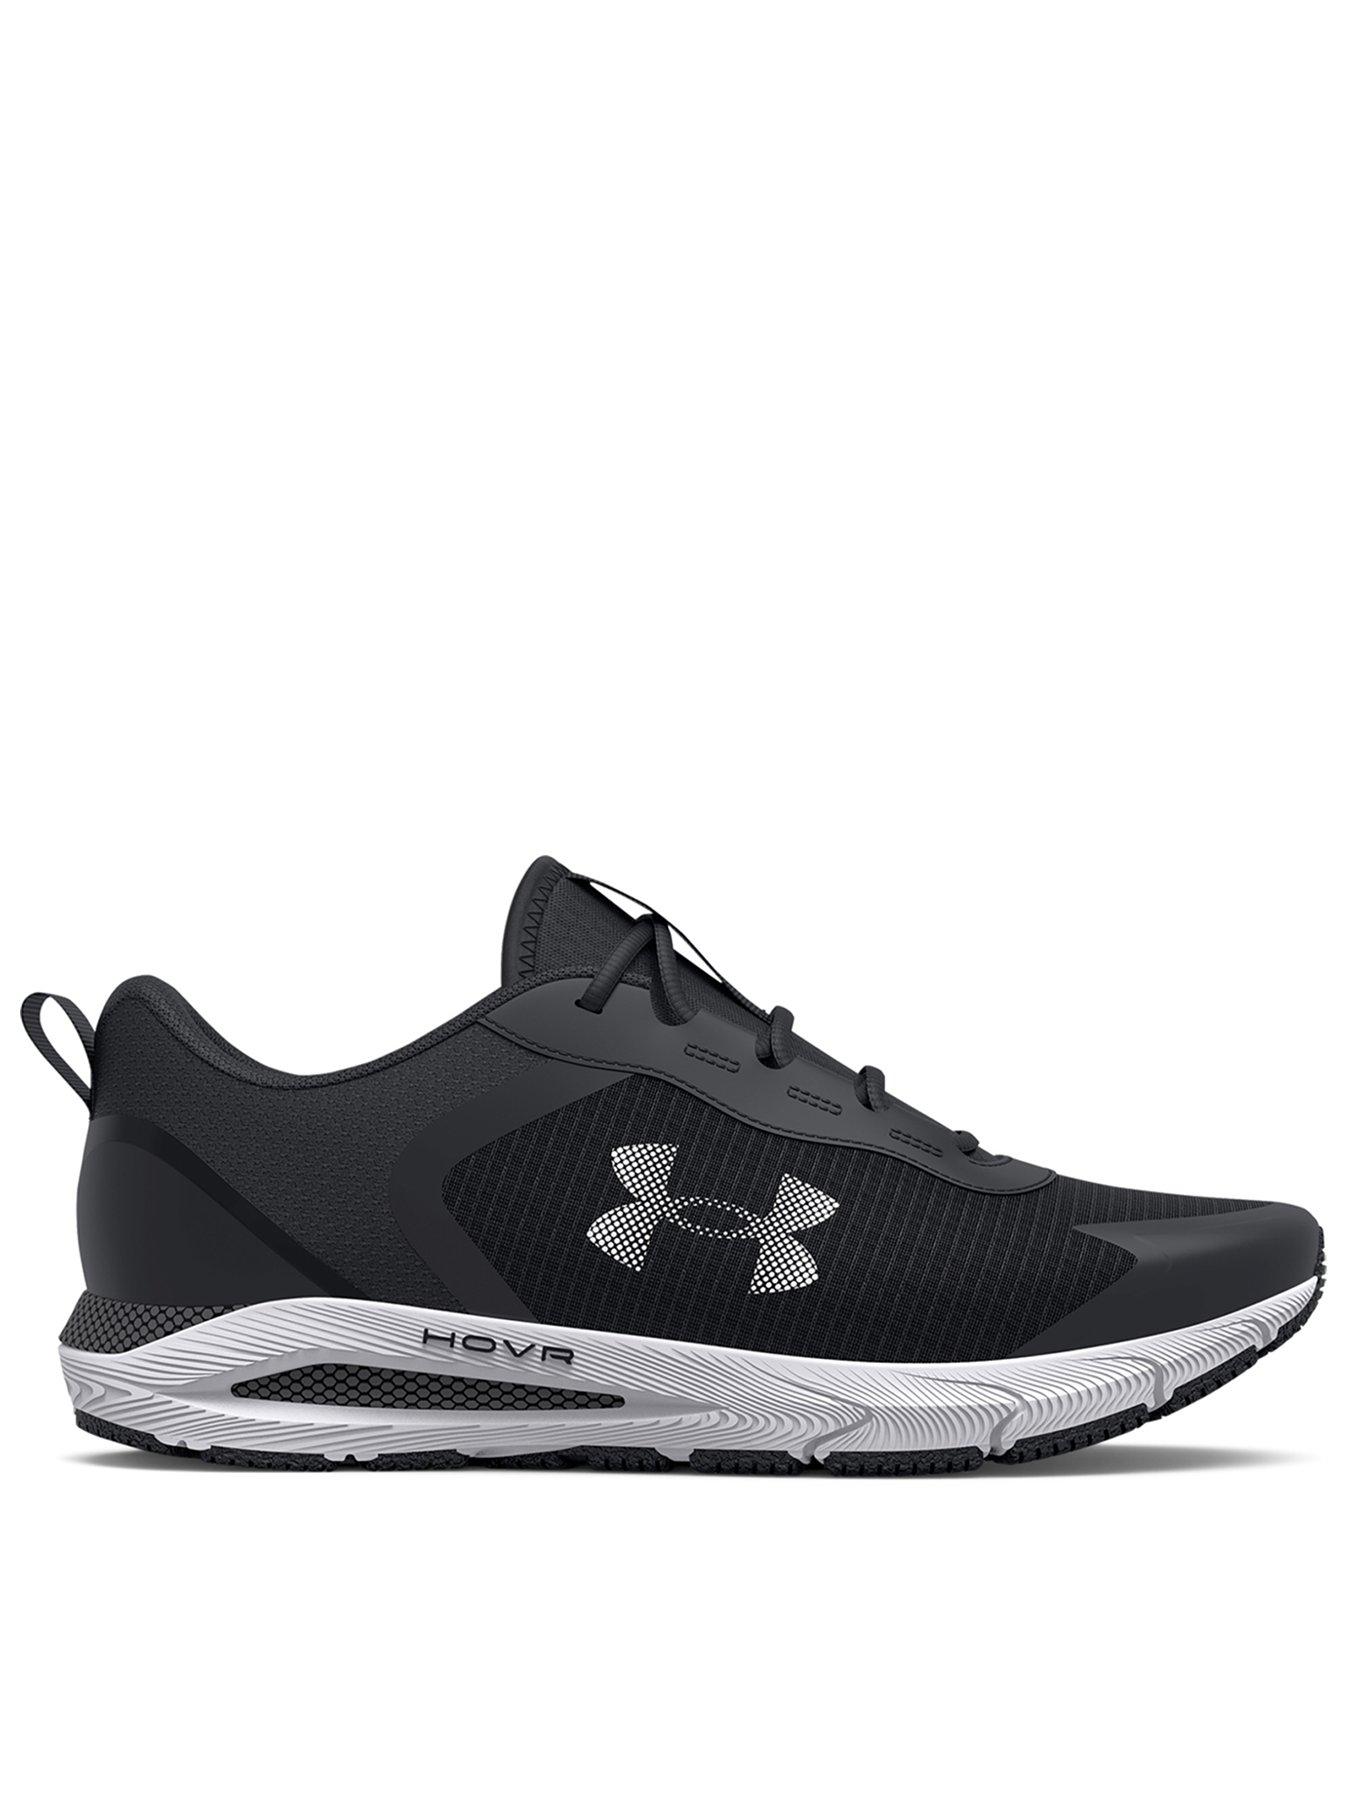 mens grey under armour trainers